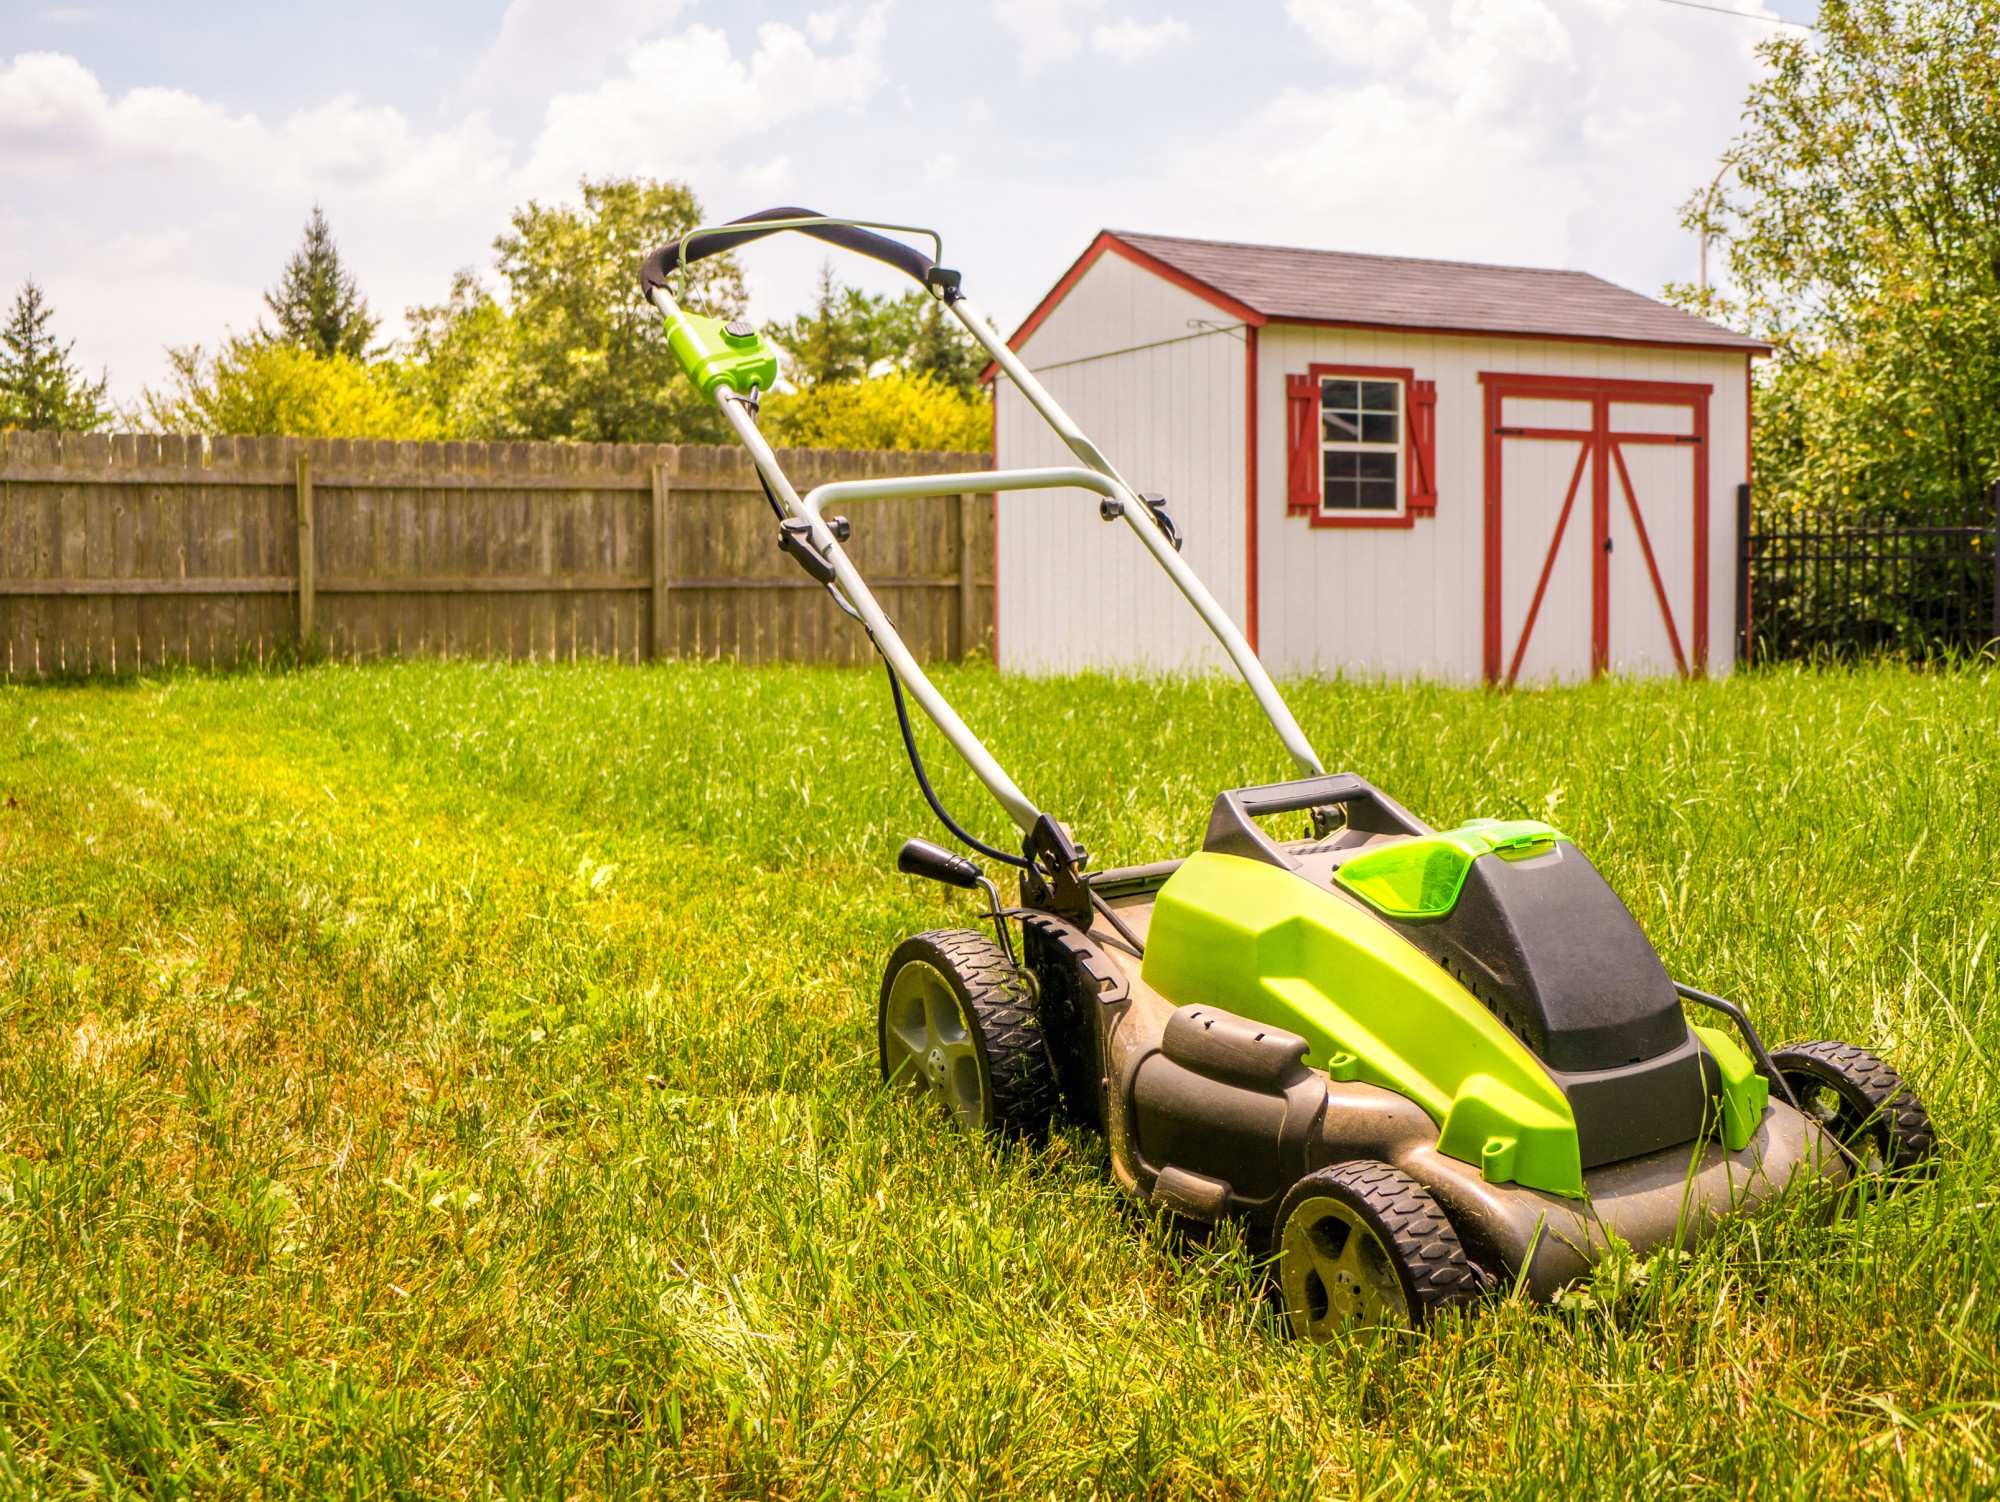 Hiring professional lawn care services to take care of your yard provides several benefits. Here's why you should let the professionals care for your yard.